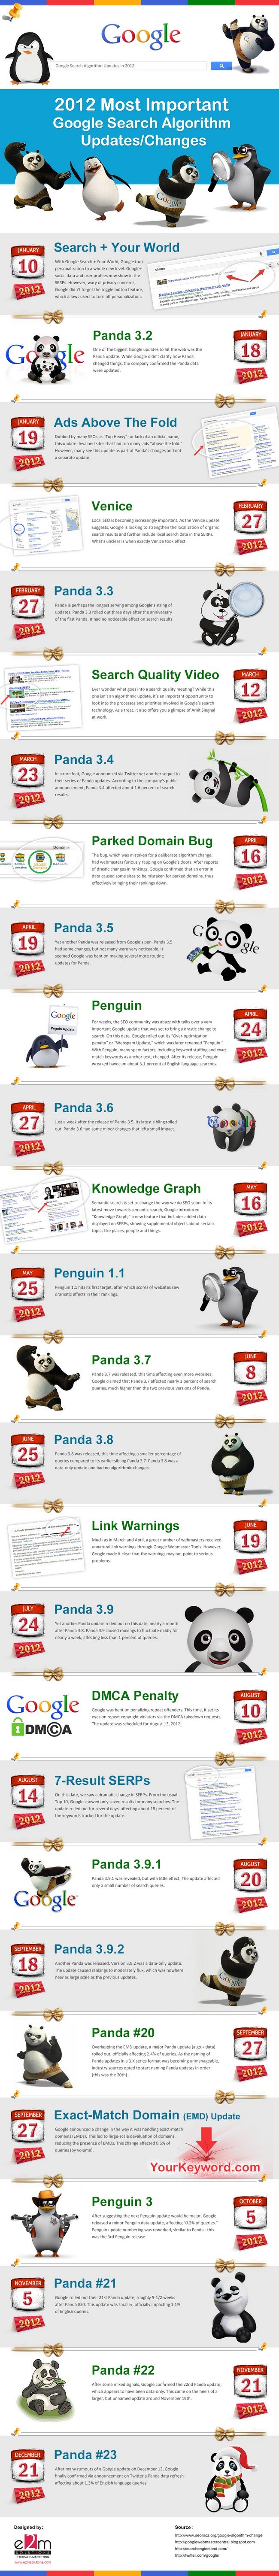 27 Most Important Google Search Algorithm Updates in 2012